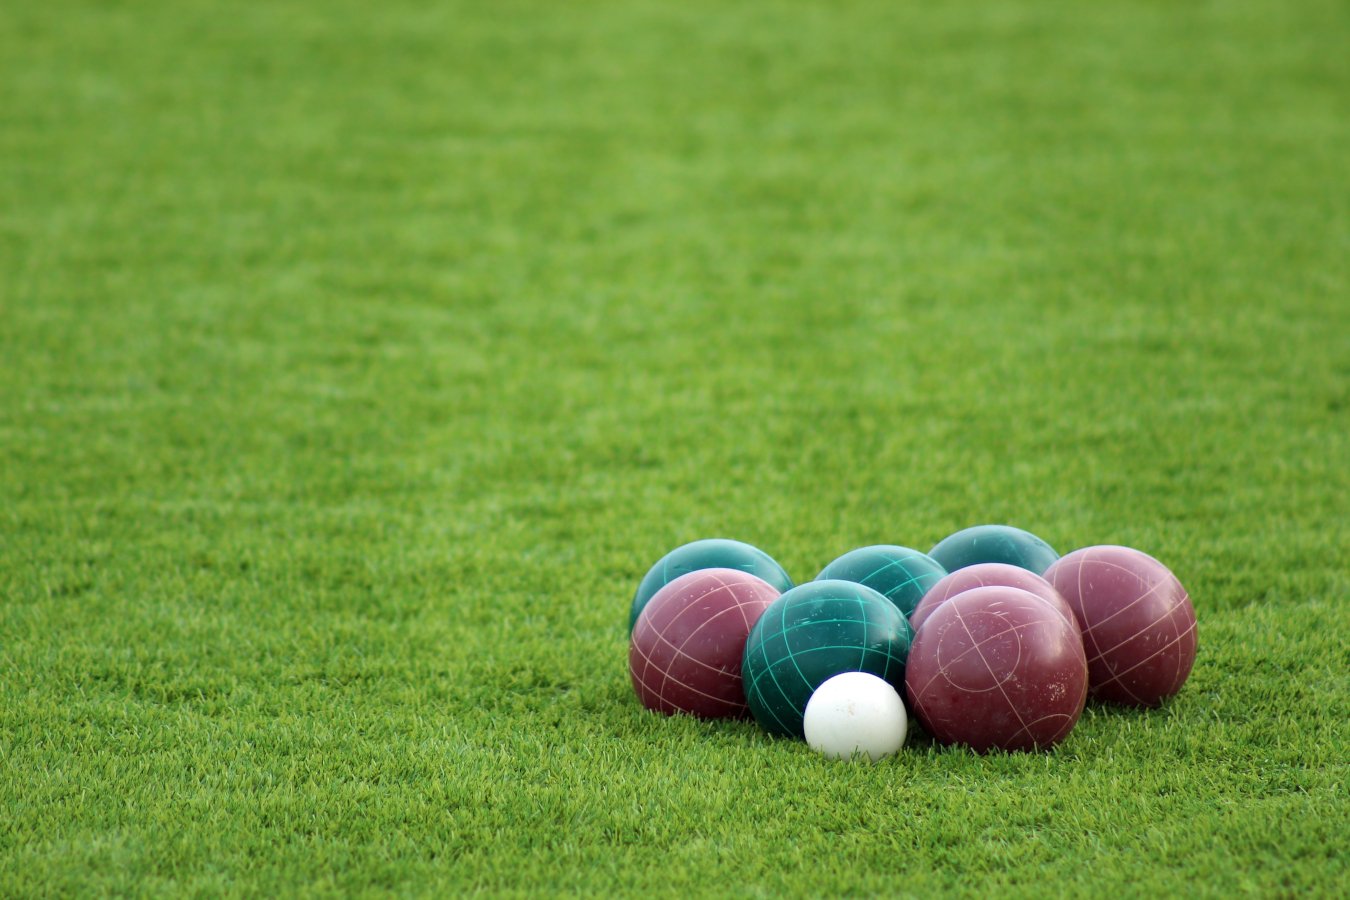 The Pallino Is The Small White Ball Used In Bocce Ball?